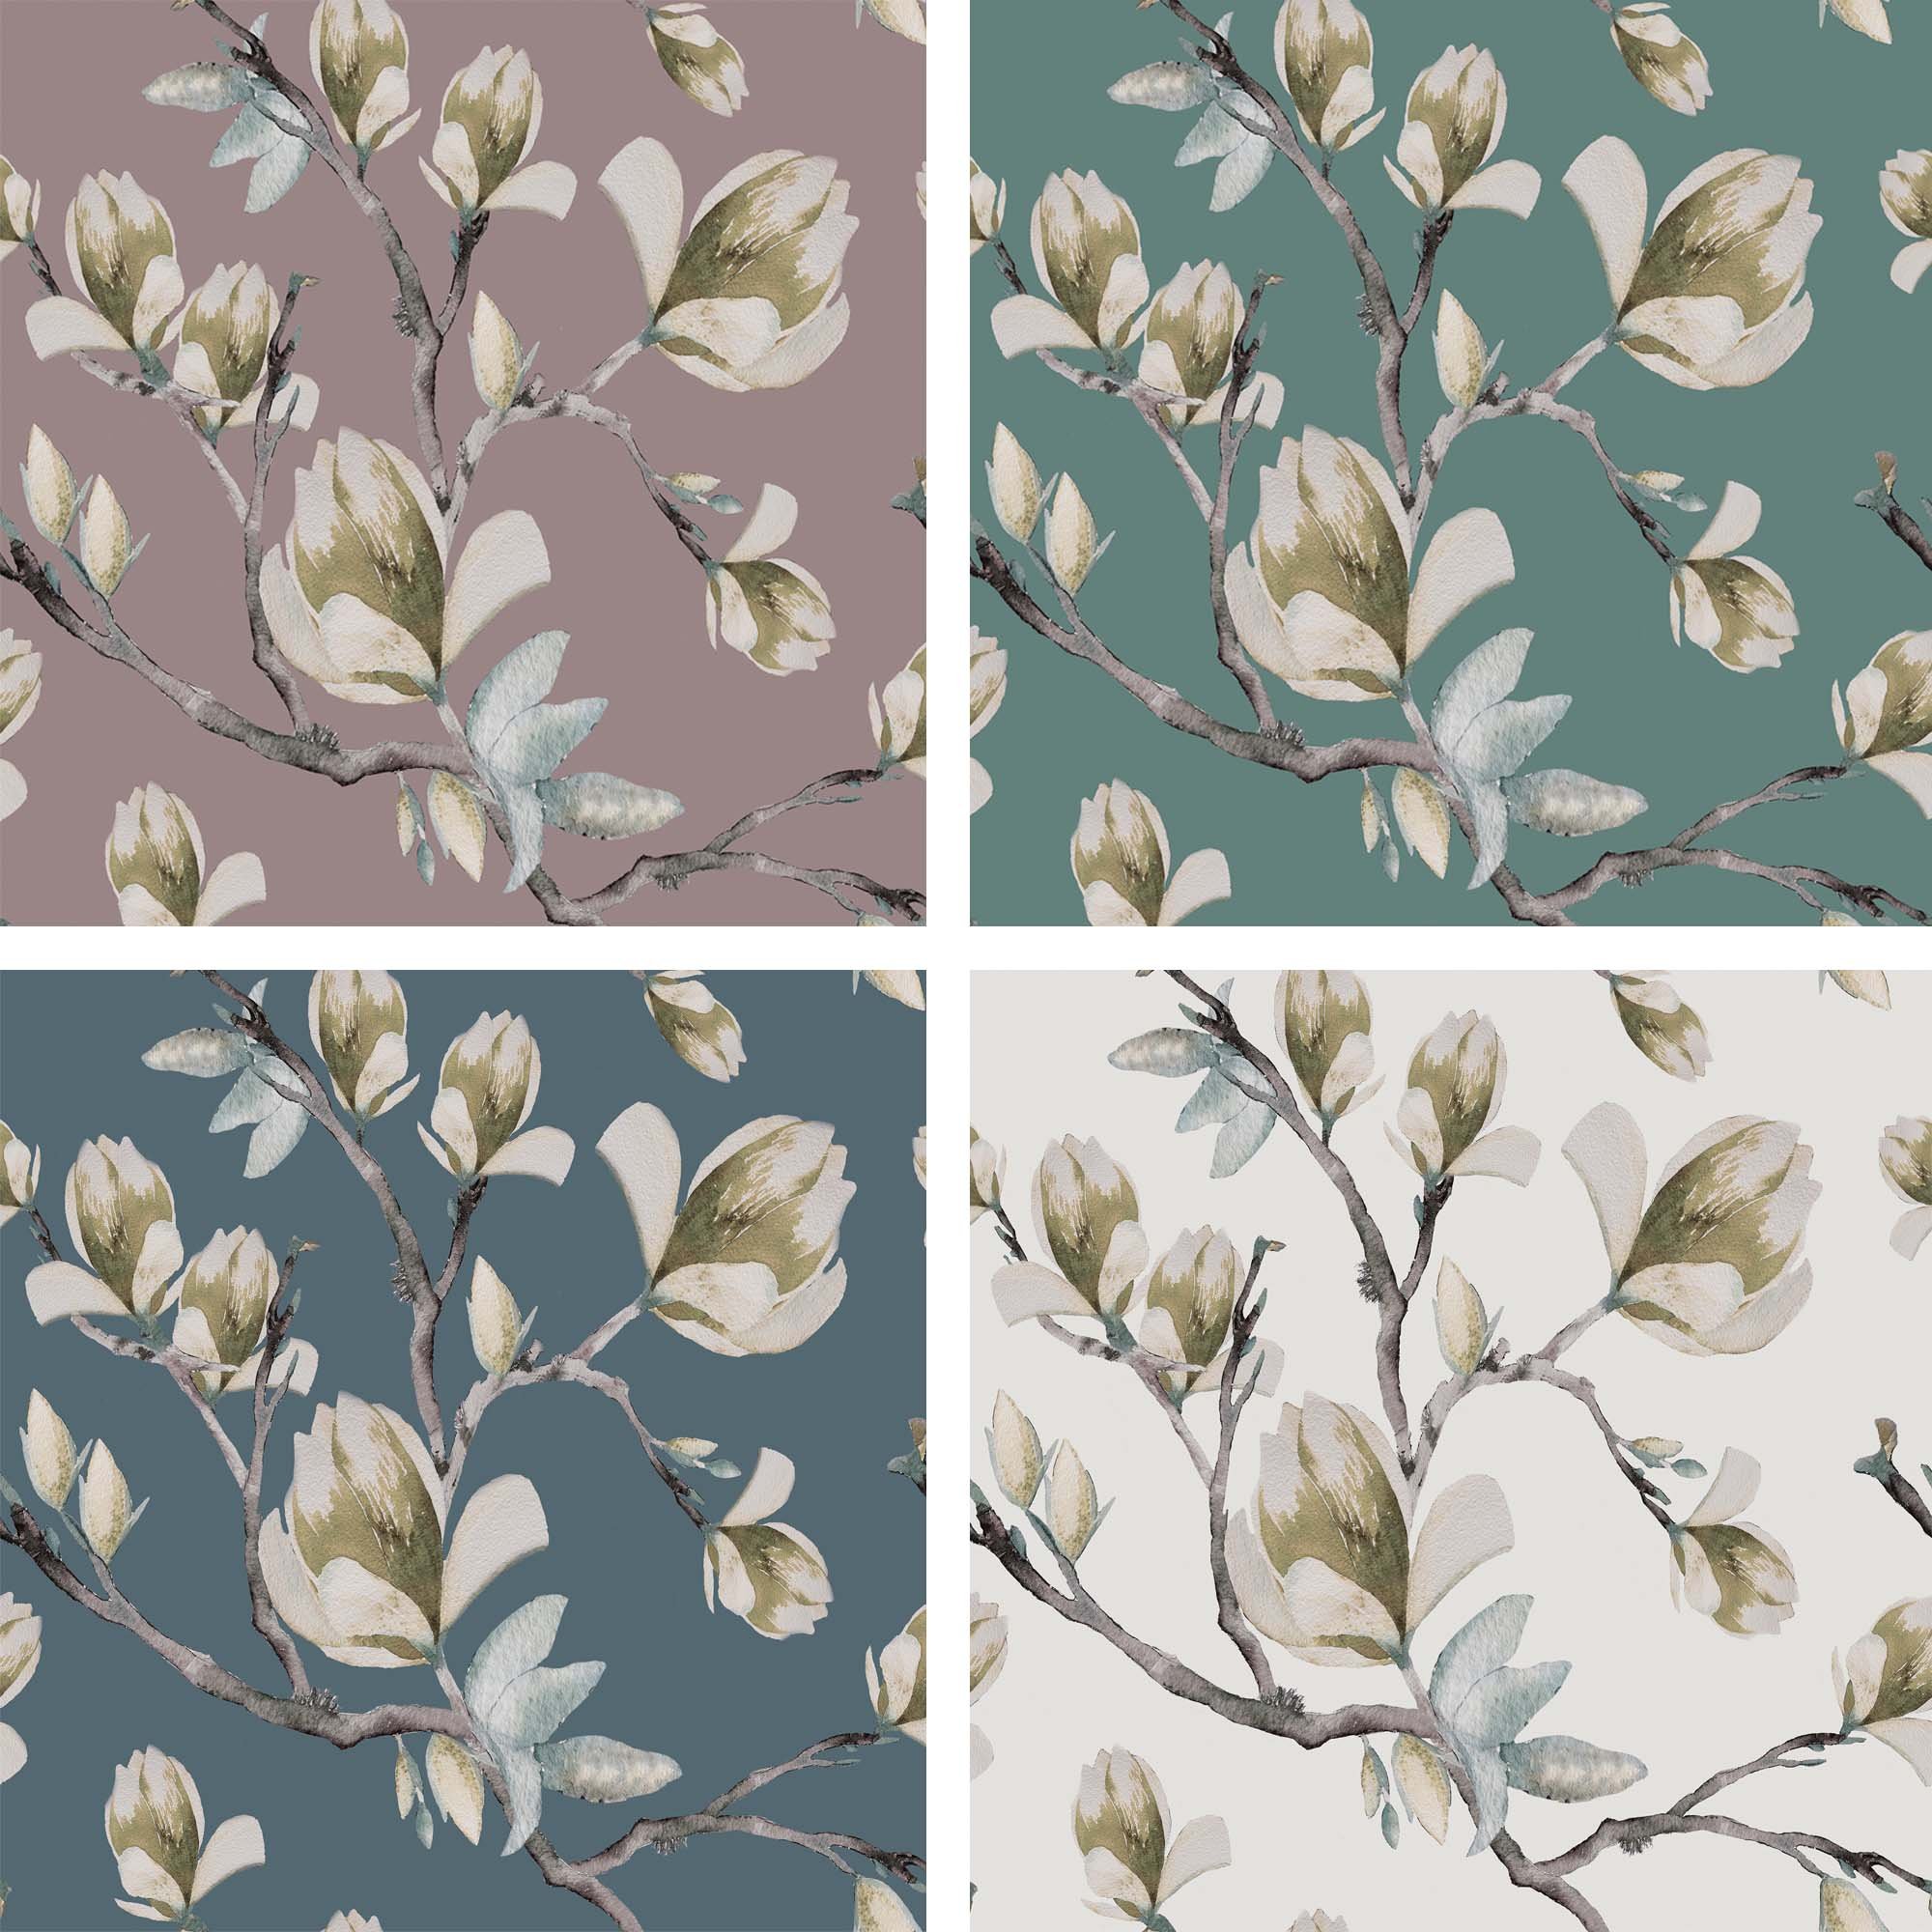 Magnolias and Branches in Sepia Color Study